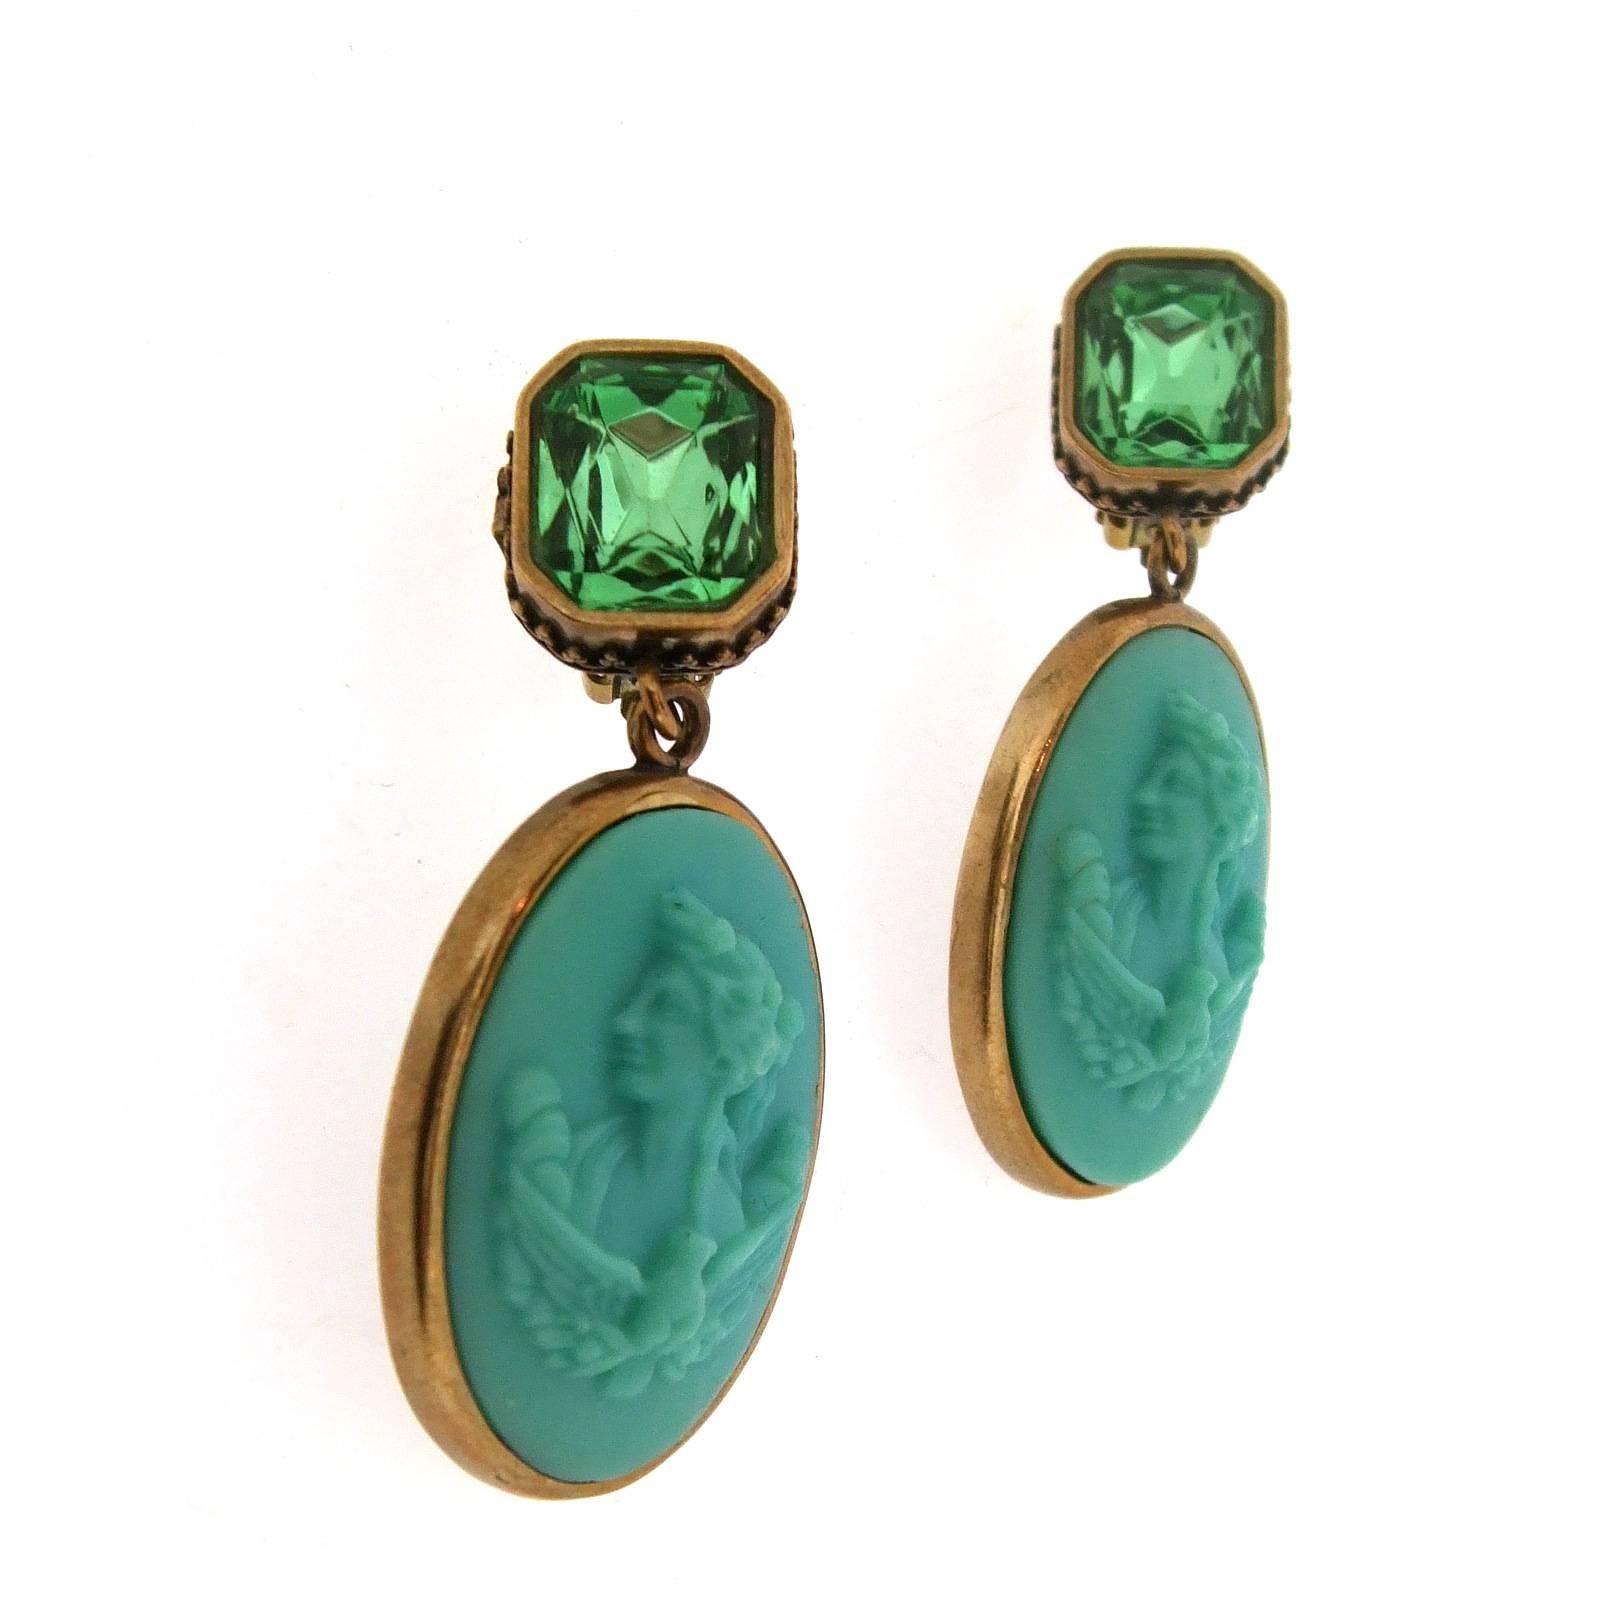 A pair of two part clip on earrings, with a turquoise German glass cameo. Top is green faceted glass. Cameo image is reproduced from Greco/Roman mythology.

They measure: 5.1cm drop by 1.1cm wide at the top and 2.3cm wide at the bottom. 